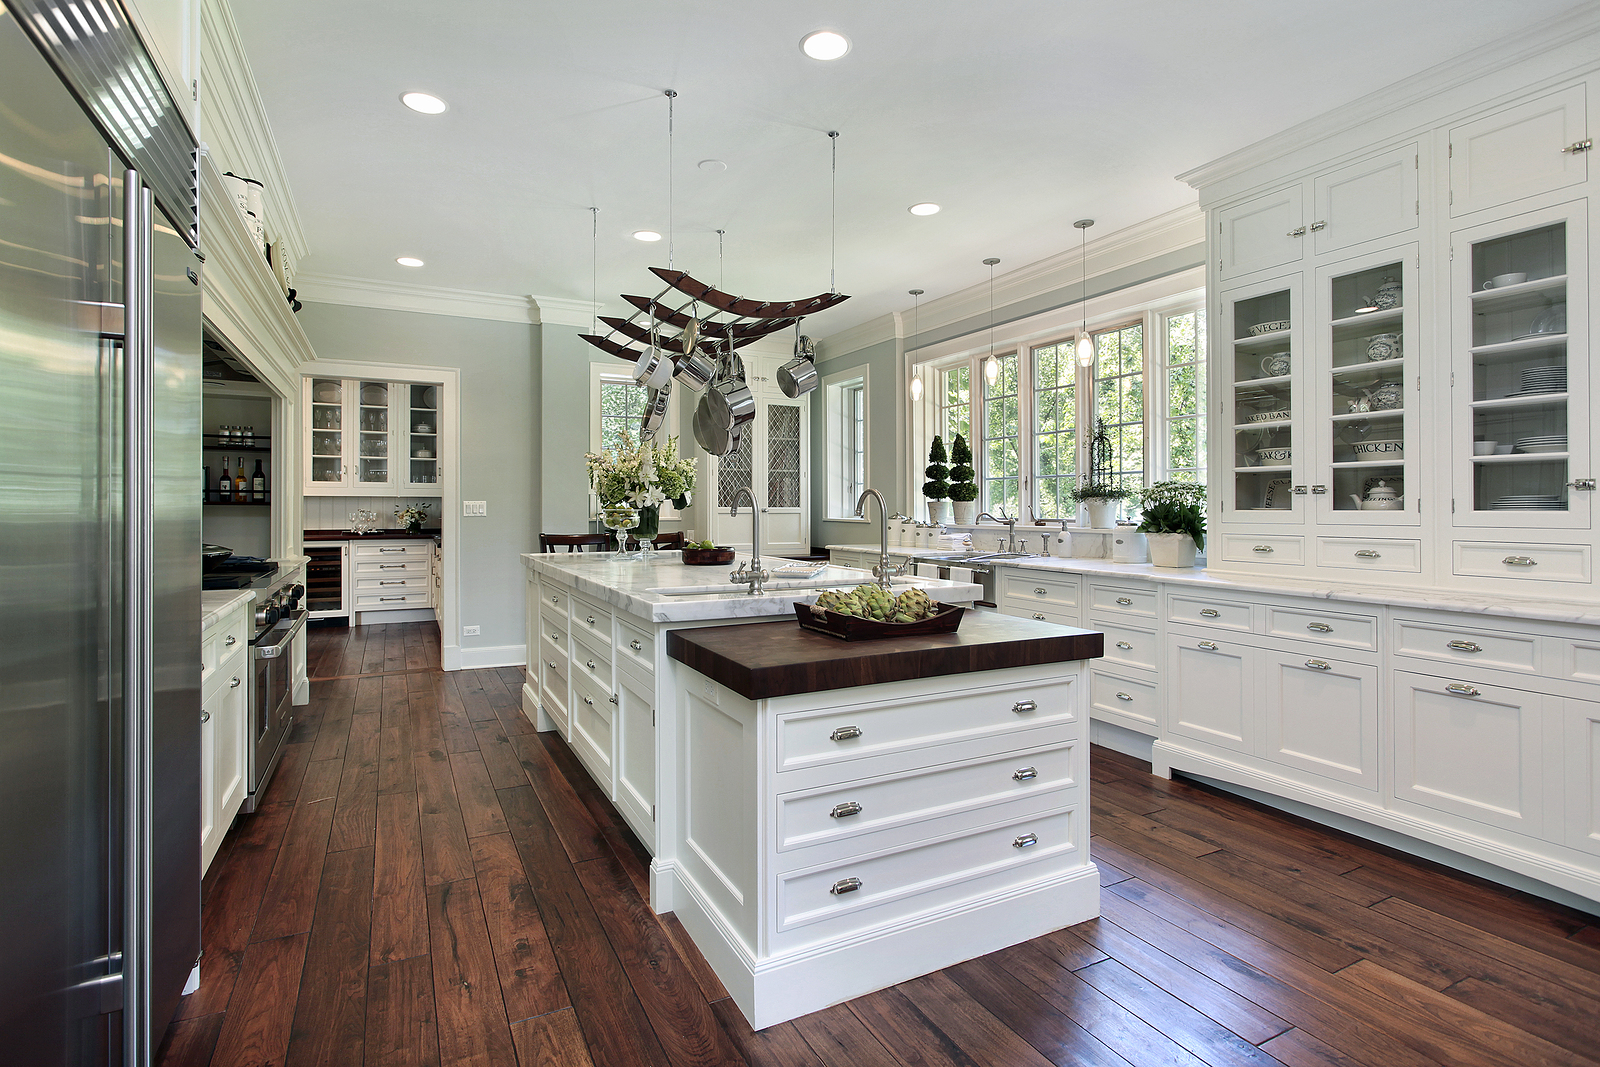 bigstock-Kitchen-in-luxury-home-with-wh-16568432